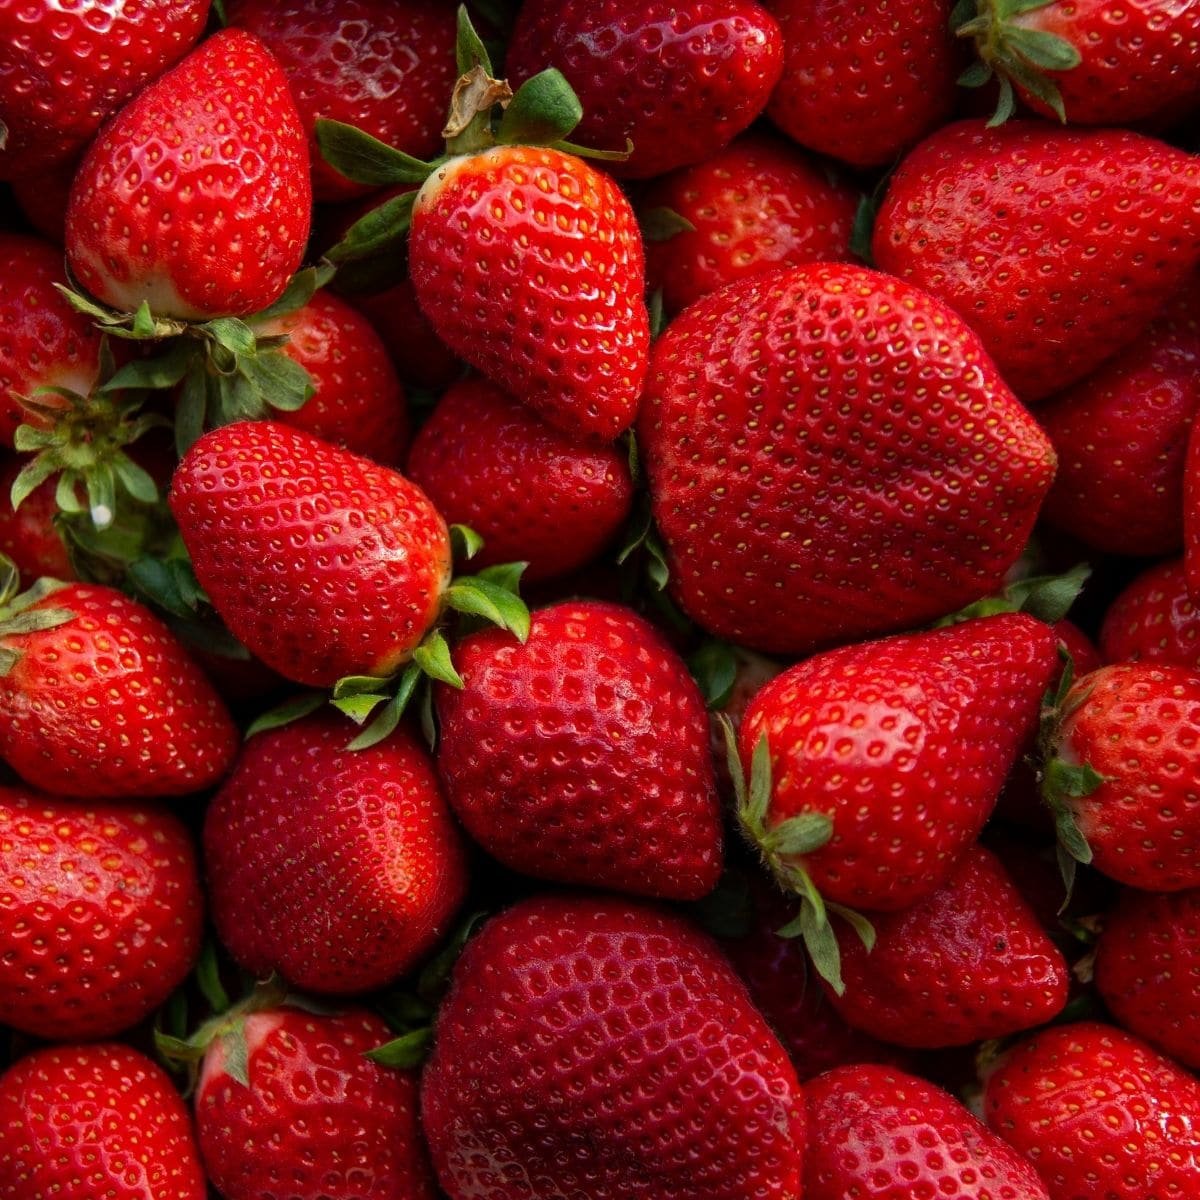 Keep-Strawberries-Fresh-And-Delicious-featured.jpg